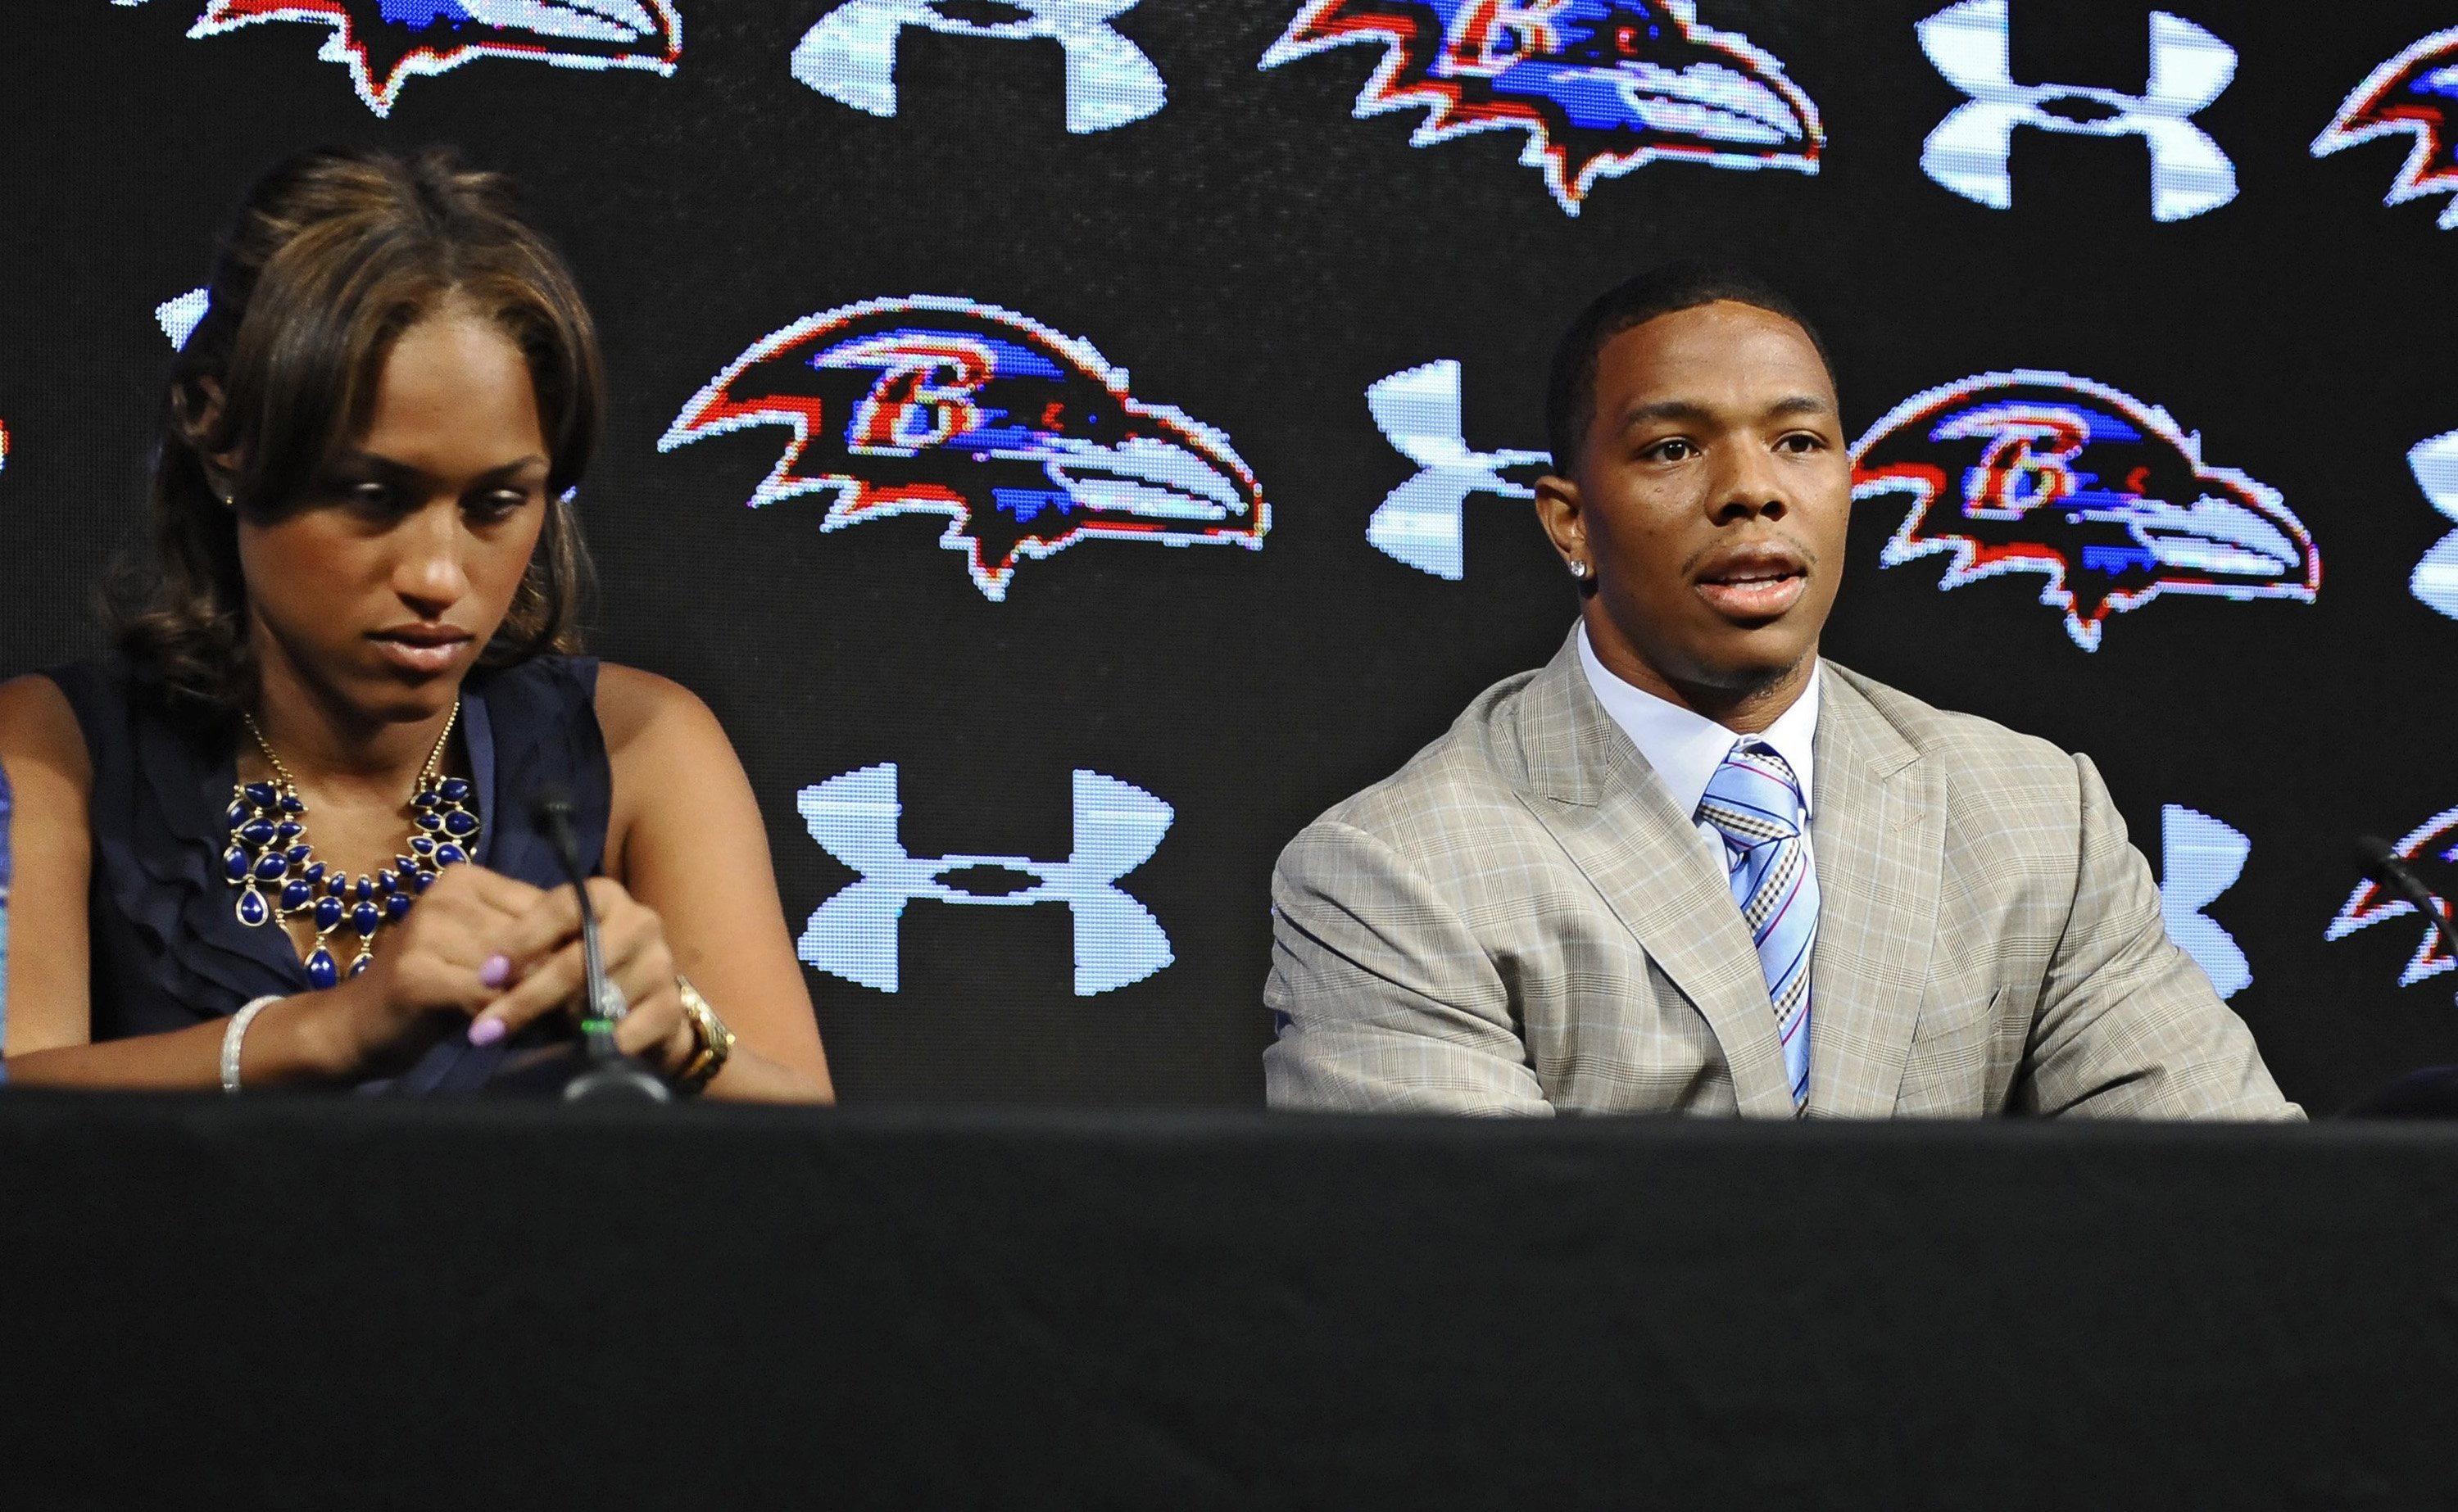 Ravens running back Ray Rice, right, and his wife Janay made statements to the news media May 5, 2014, at the Under Armour Performance Center in Owings Mills, Md, regarding his assault charge for knocking her unconscious in a New Jersey casino. (Baltimore Sun&mdash;MCT via Getty Images)